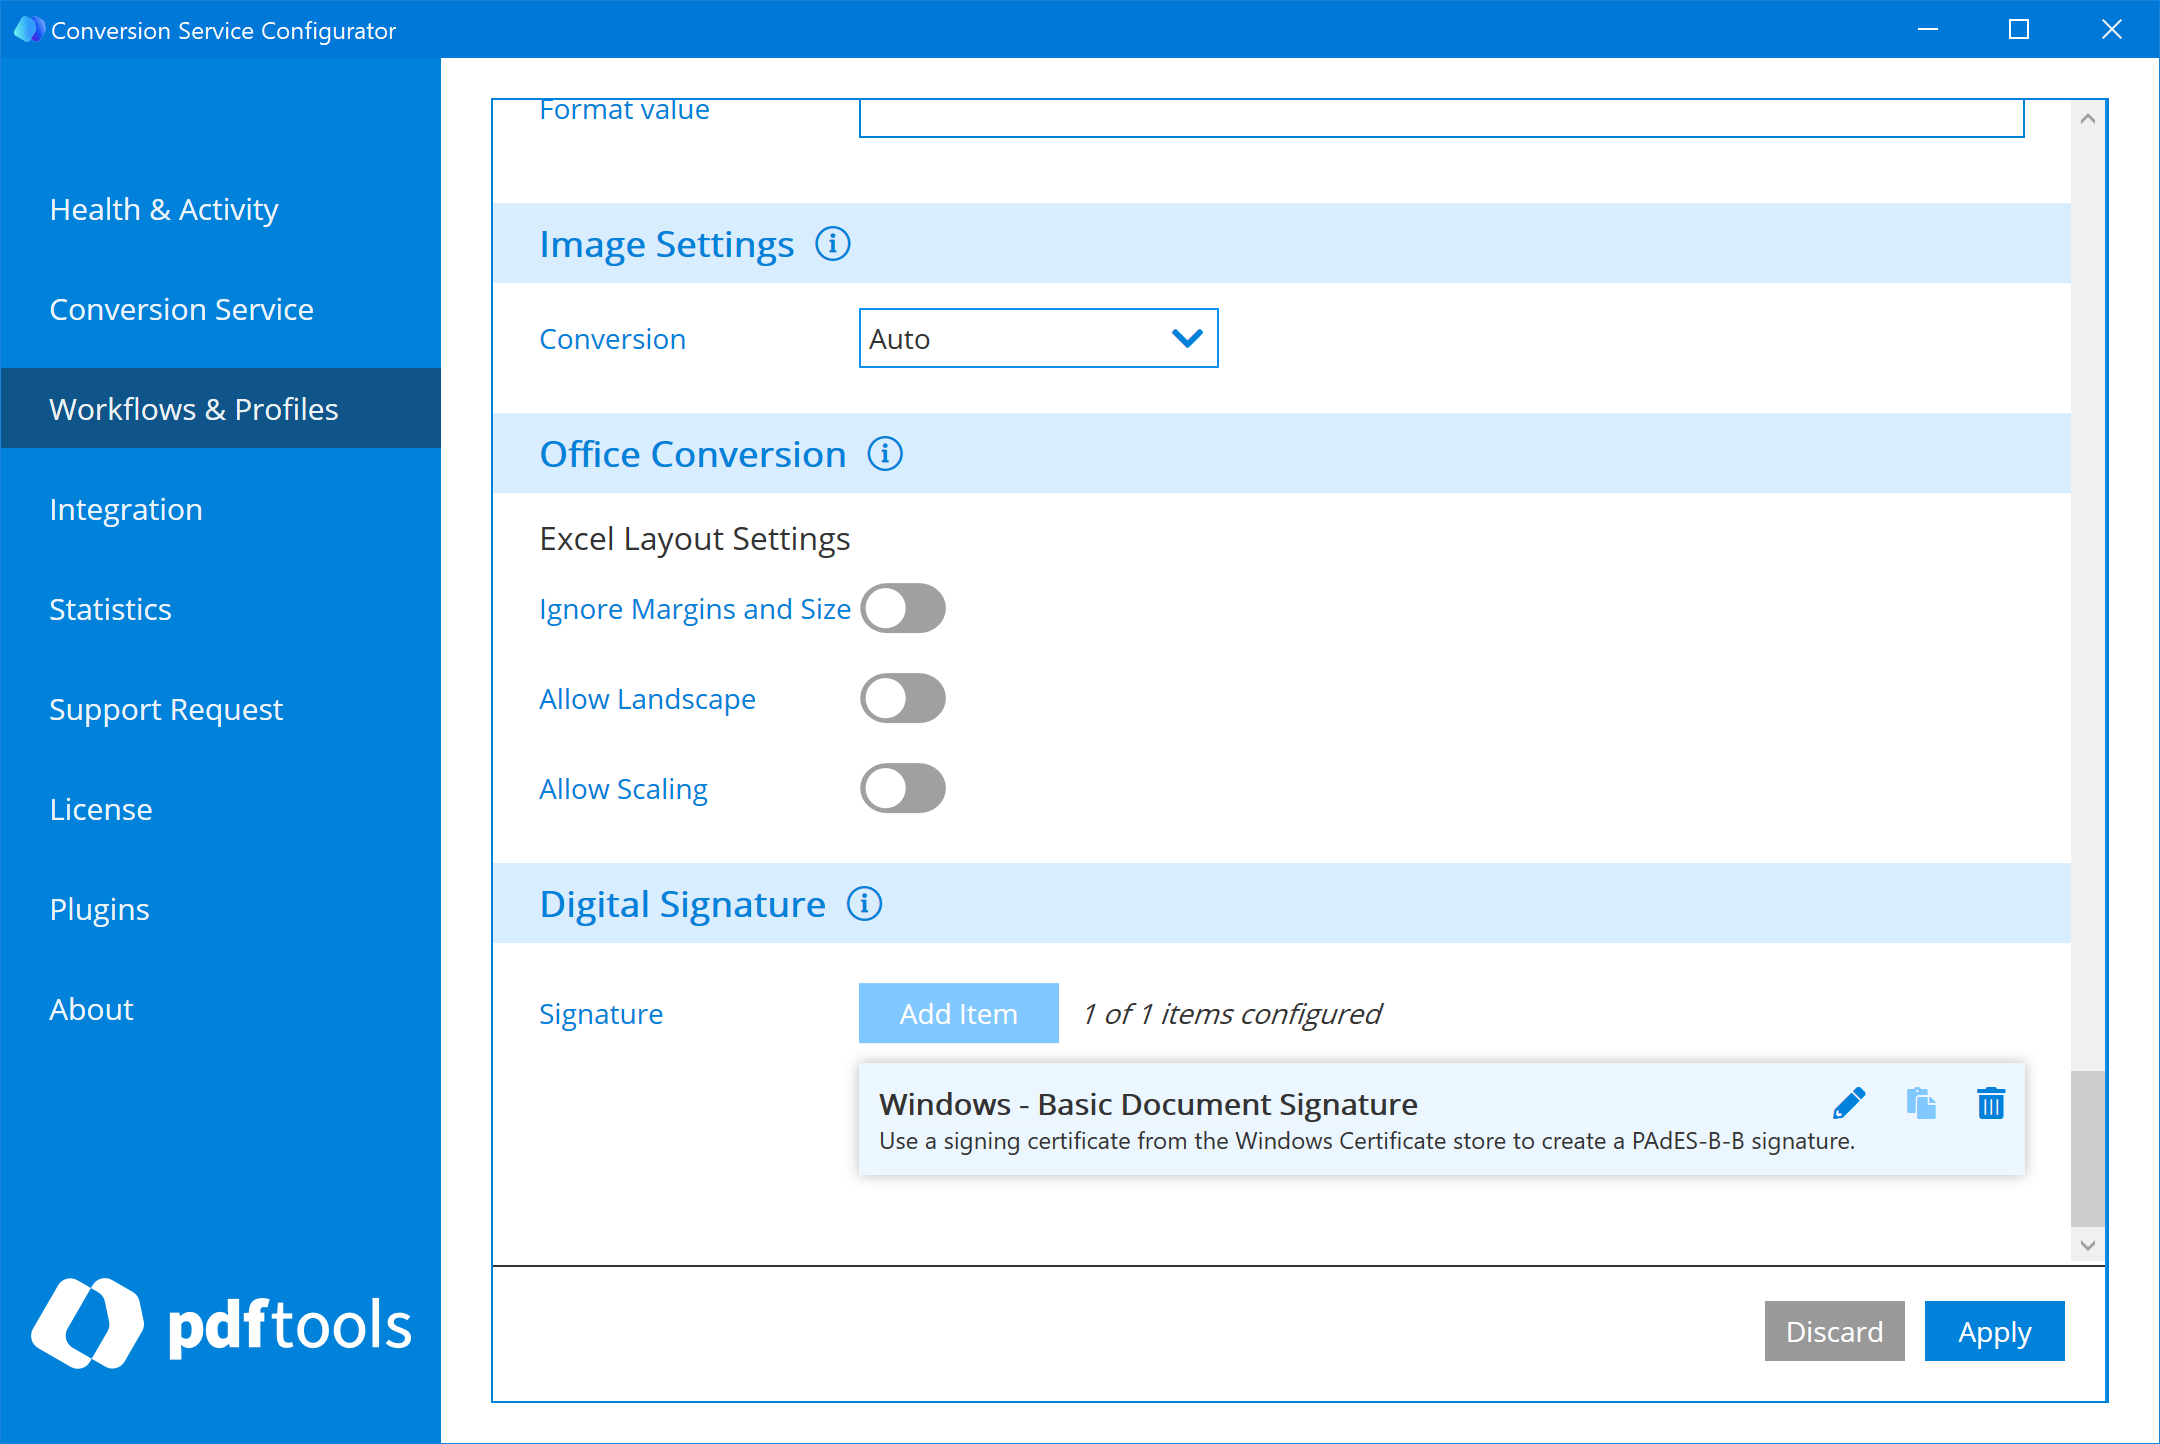 Signature types section configured of the Conversion Service Configurator